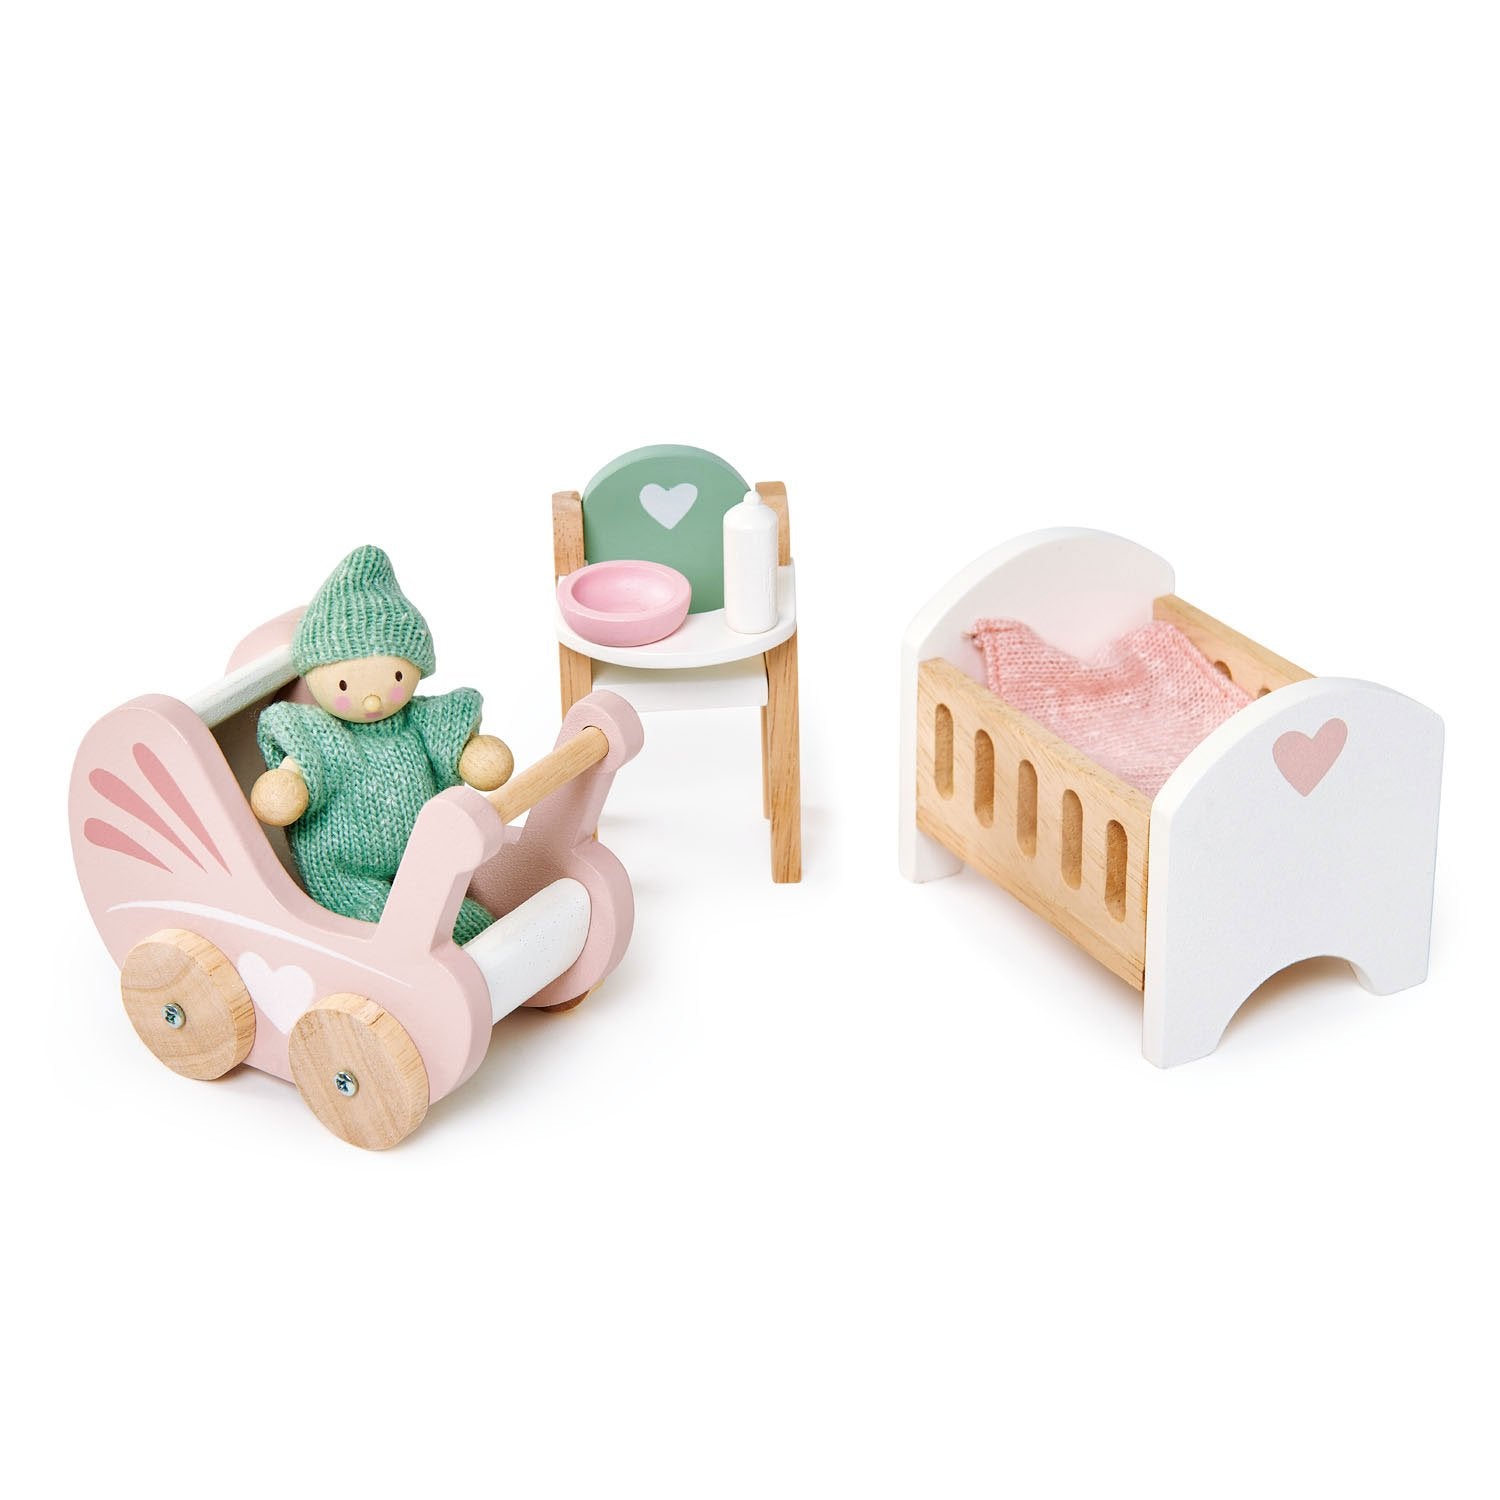 Tender baby accessoires – The Mini Story